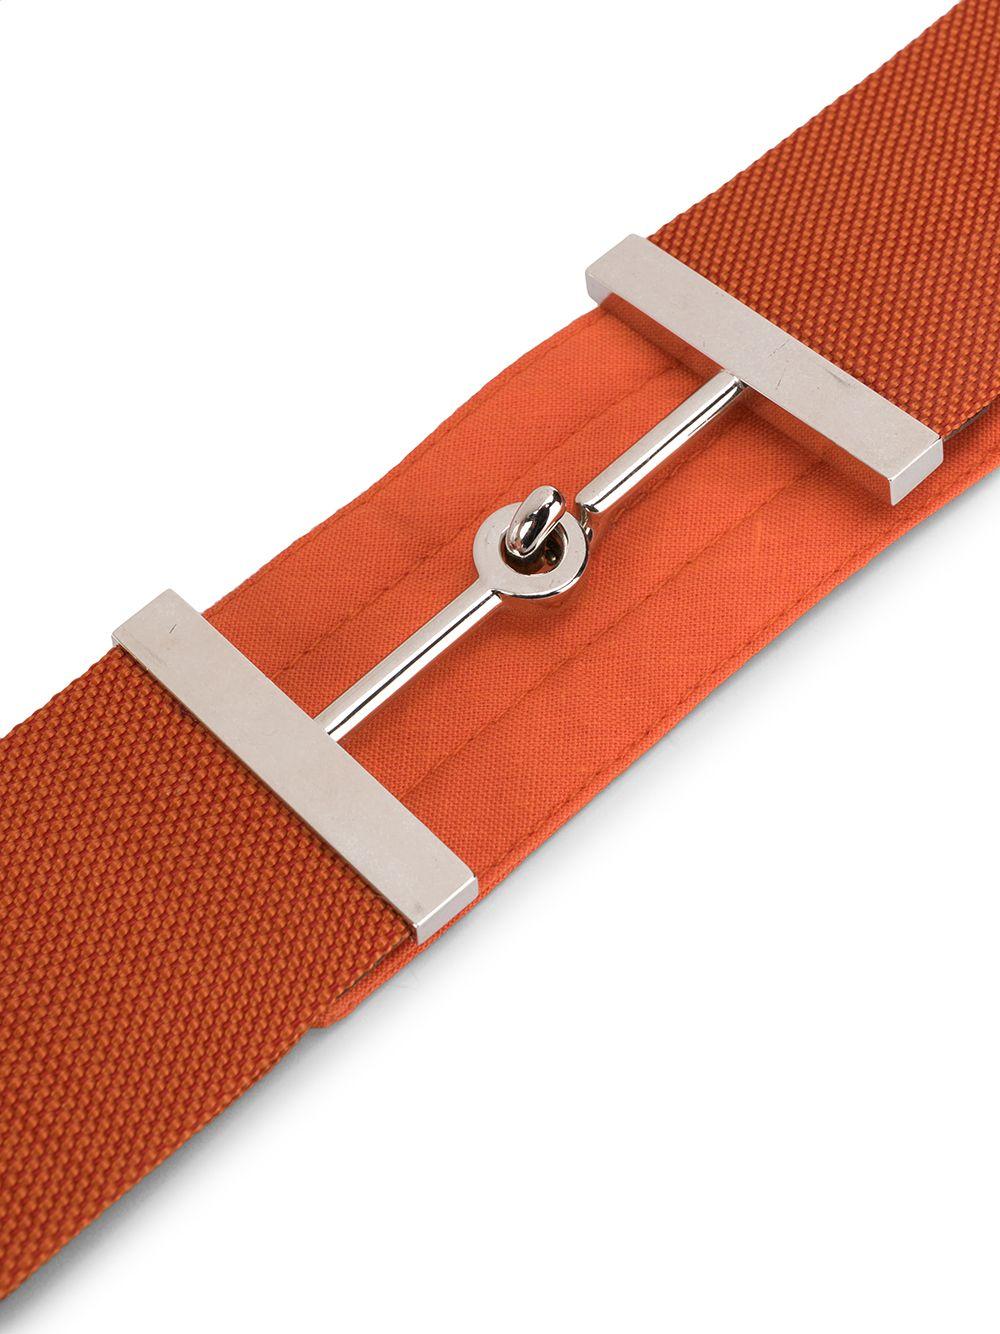 Crafted in France from a vibrant orange cotton-blend, this pre-owned belt by Hermès features a hook and eye fastening and a horsebit buckle accented by silver-toned metal hardware.

Colour: Orange/ Silver

Composition: Cotton/ Silver-plated